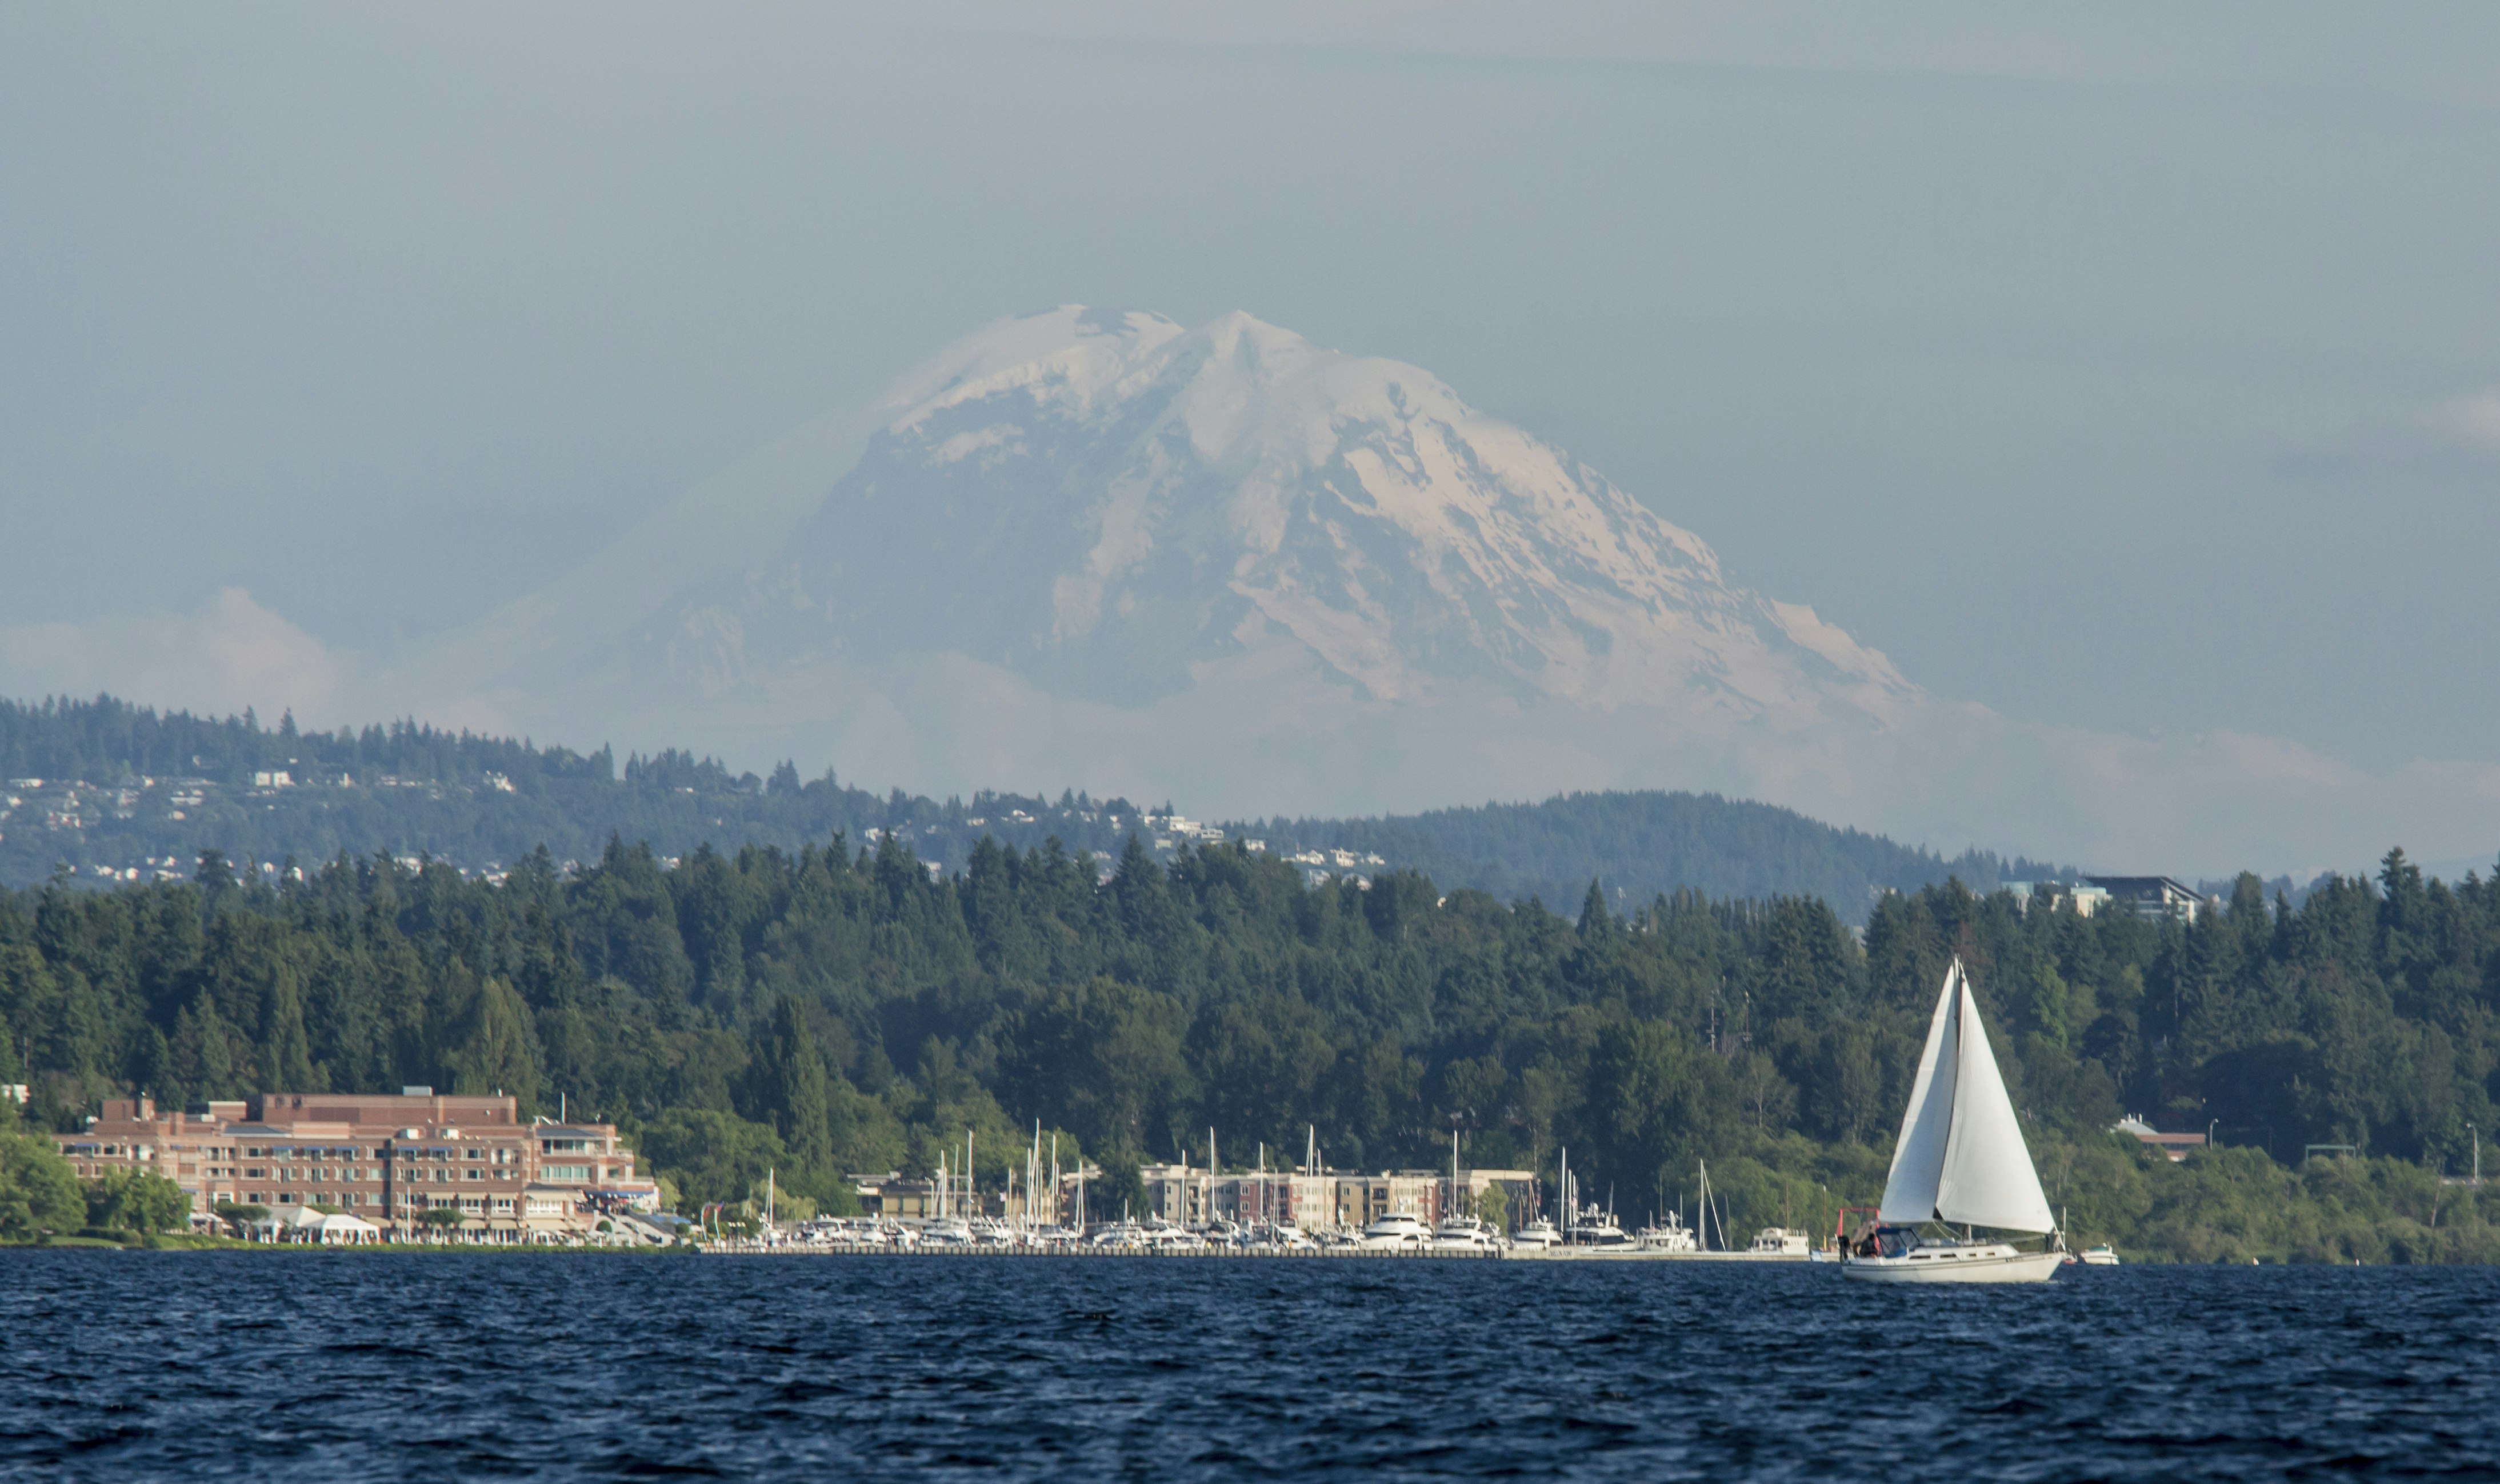 Mt. Rainier rises over Lake Washington with a white sailboat in the foreground.